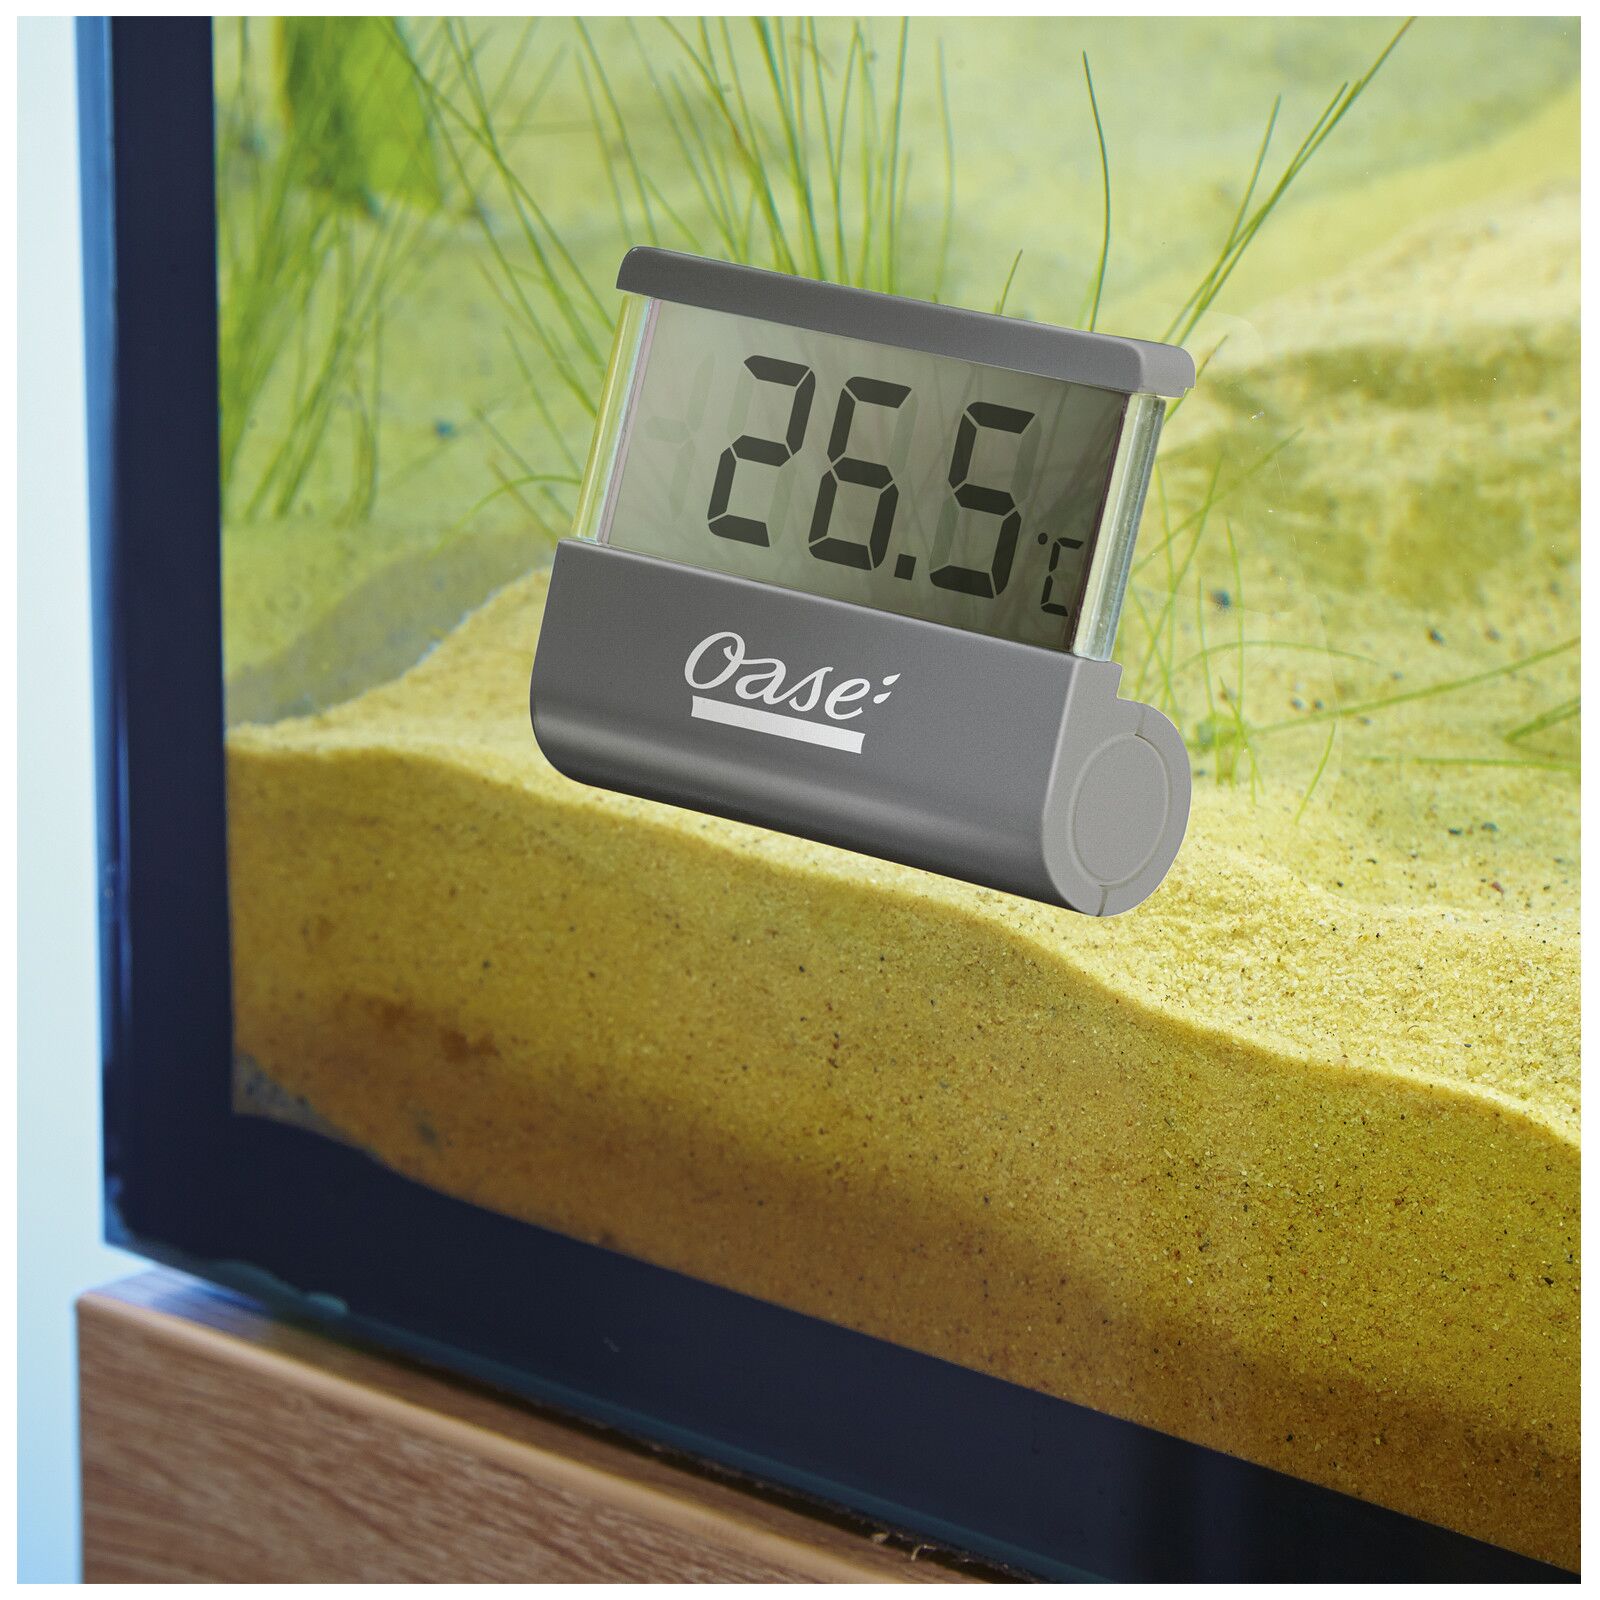 Oase - Digitales Thermometer